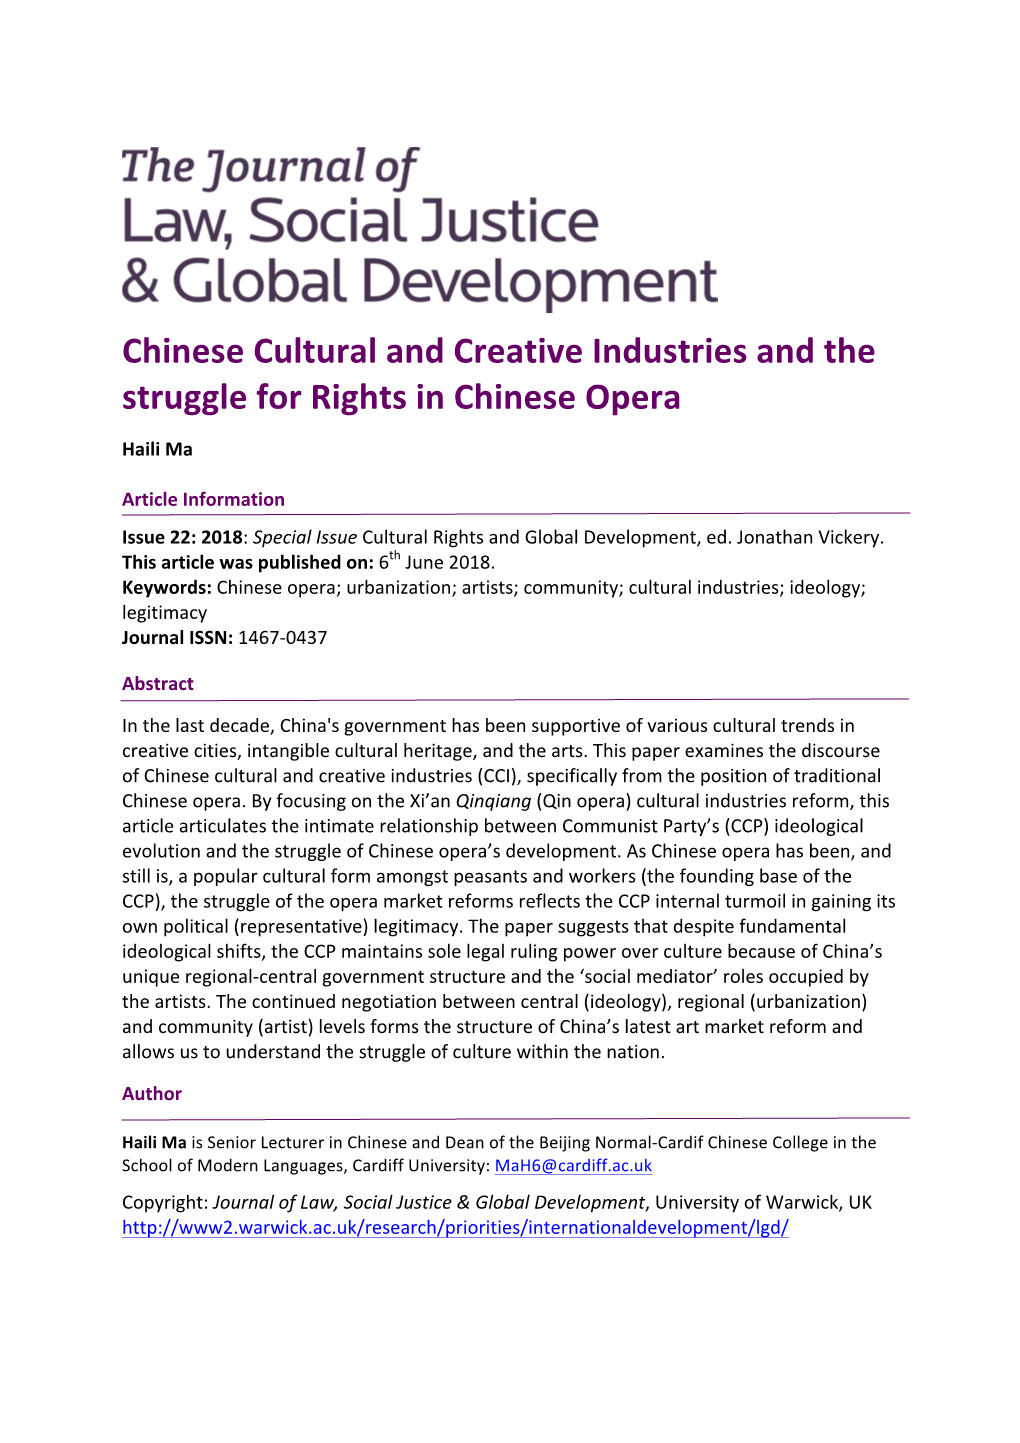 Chinese Cultural and Creative Industries and the Struggle for Rights in Chinese Opera